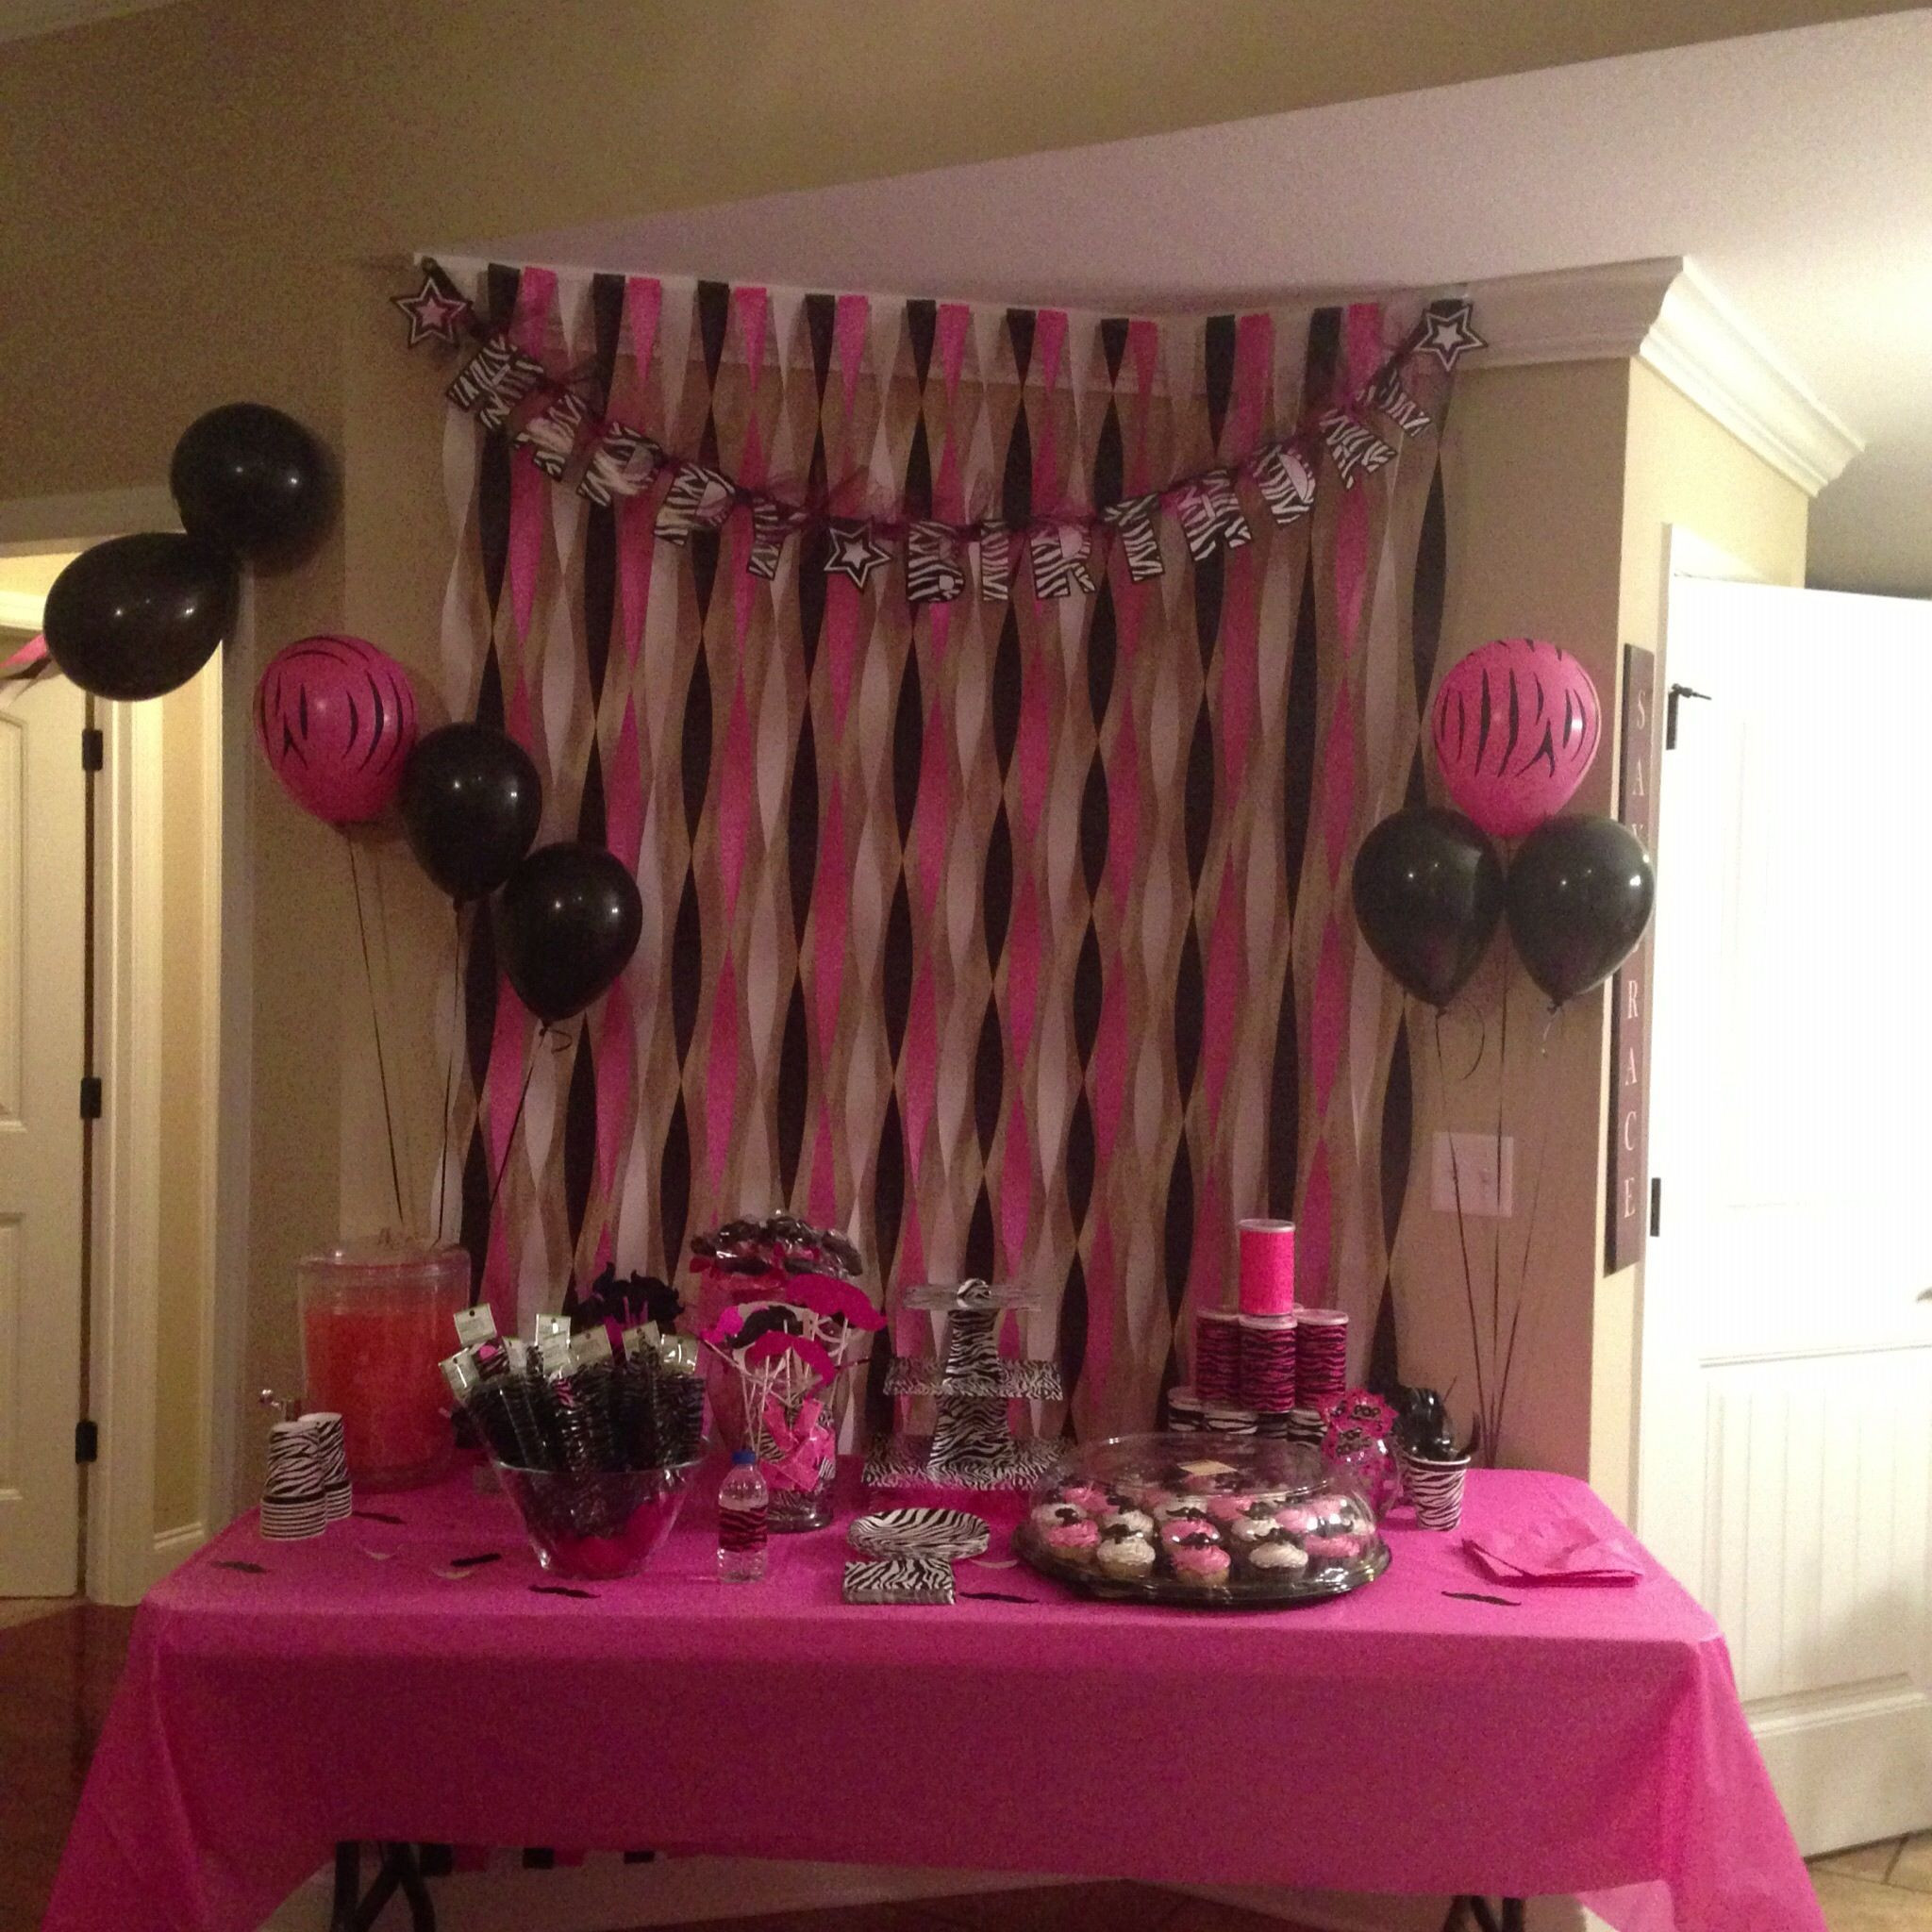 Zebra Decorations For Birthday Party
 Pink and Zebra print Mustache Party